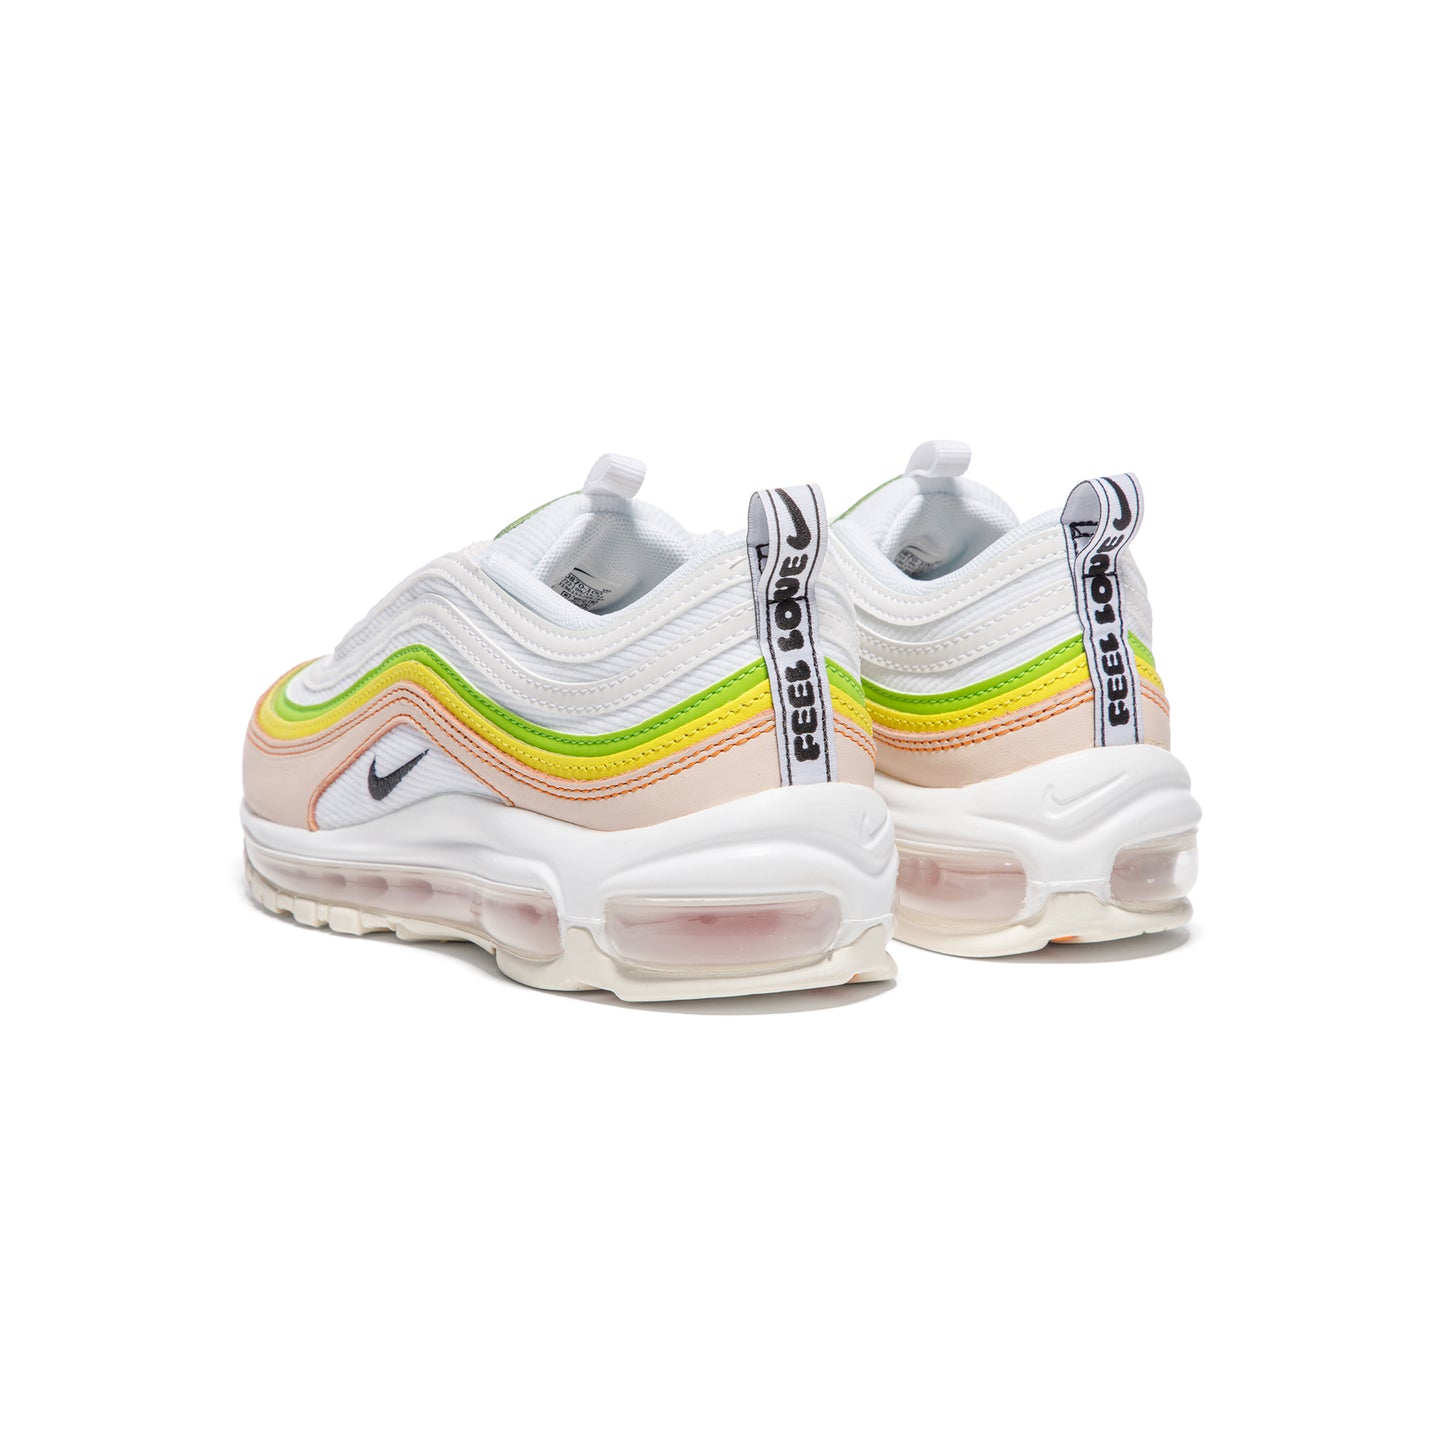 Nike Womens Air Max 97 (White/Black/Pearl Pink/Action Green)